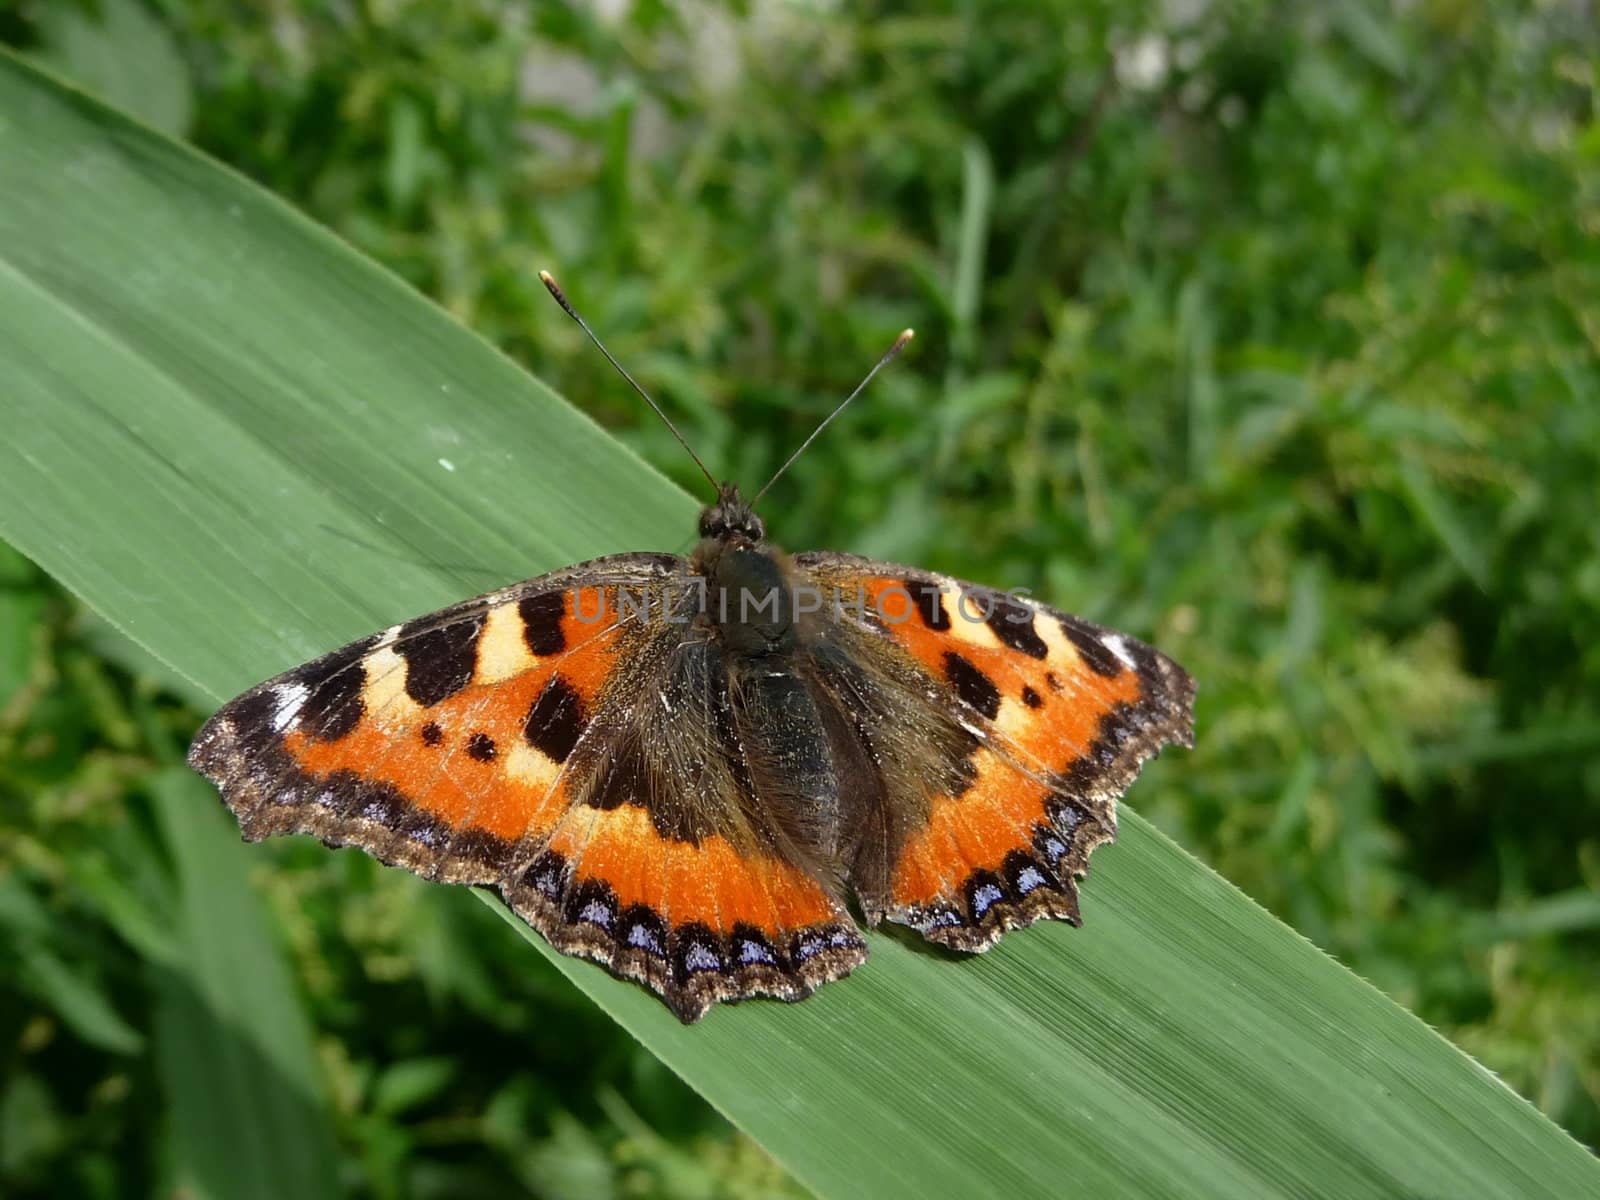 Butterfly on grass sheet by tomatto